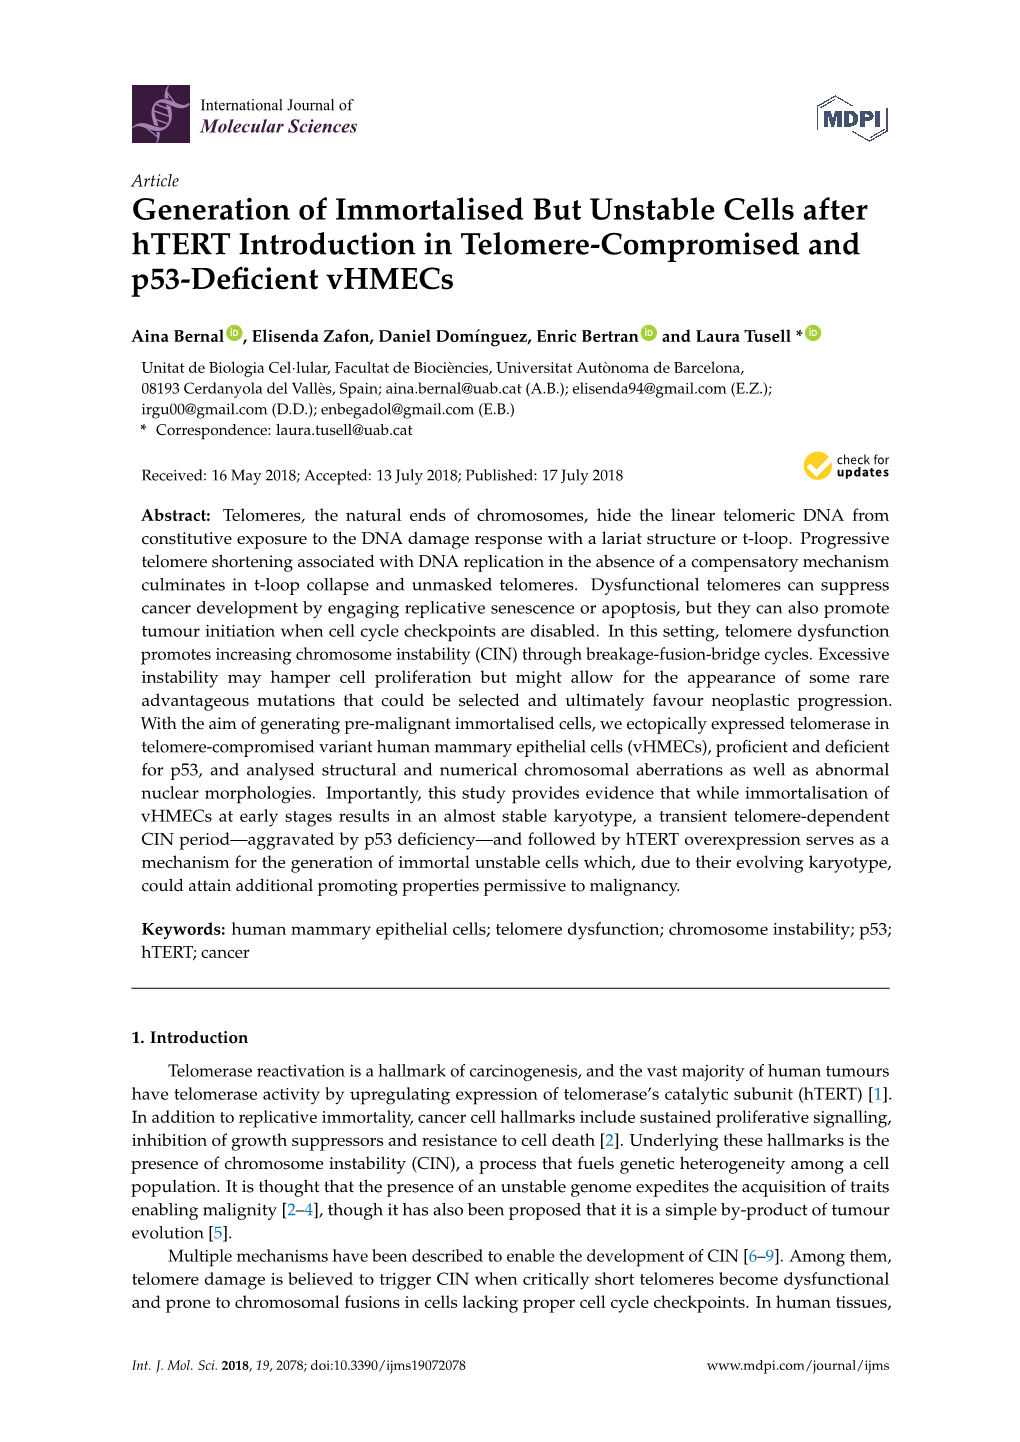 Generation of Immortalised but Unstable Cells After Htert Introduction in Telomere-Compromised and P53-Deﬁcient Vhmecs